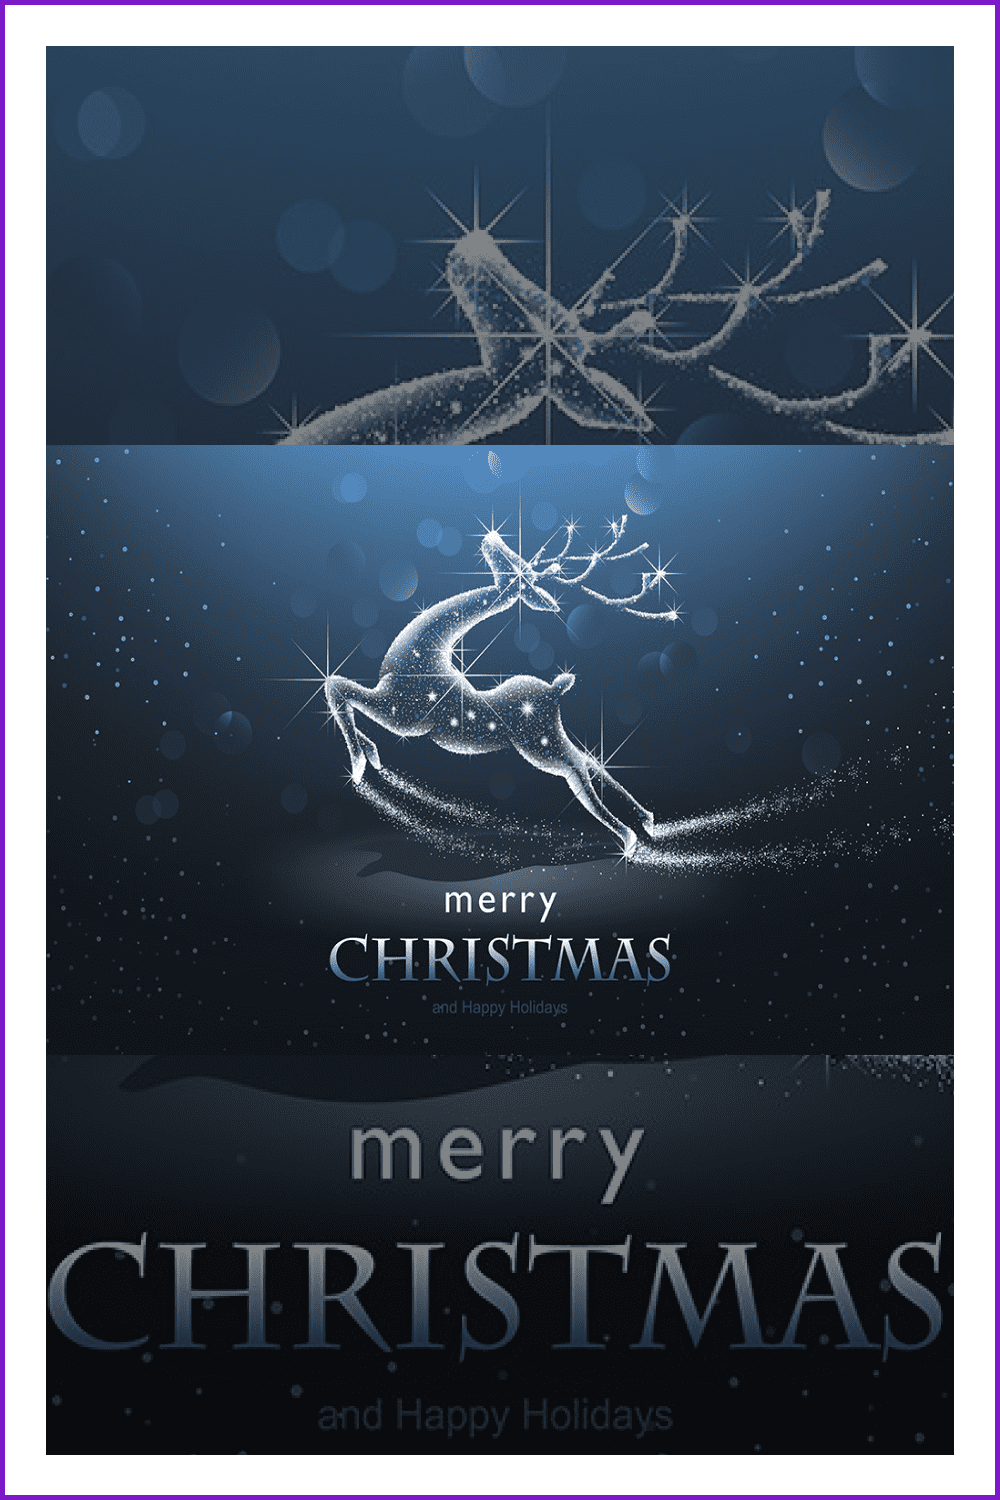 Blue Christmas background with starry deer.